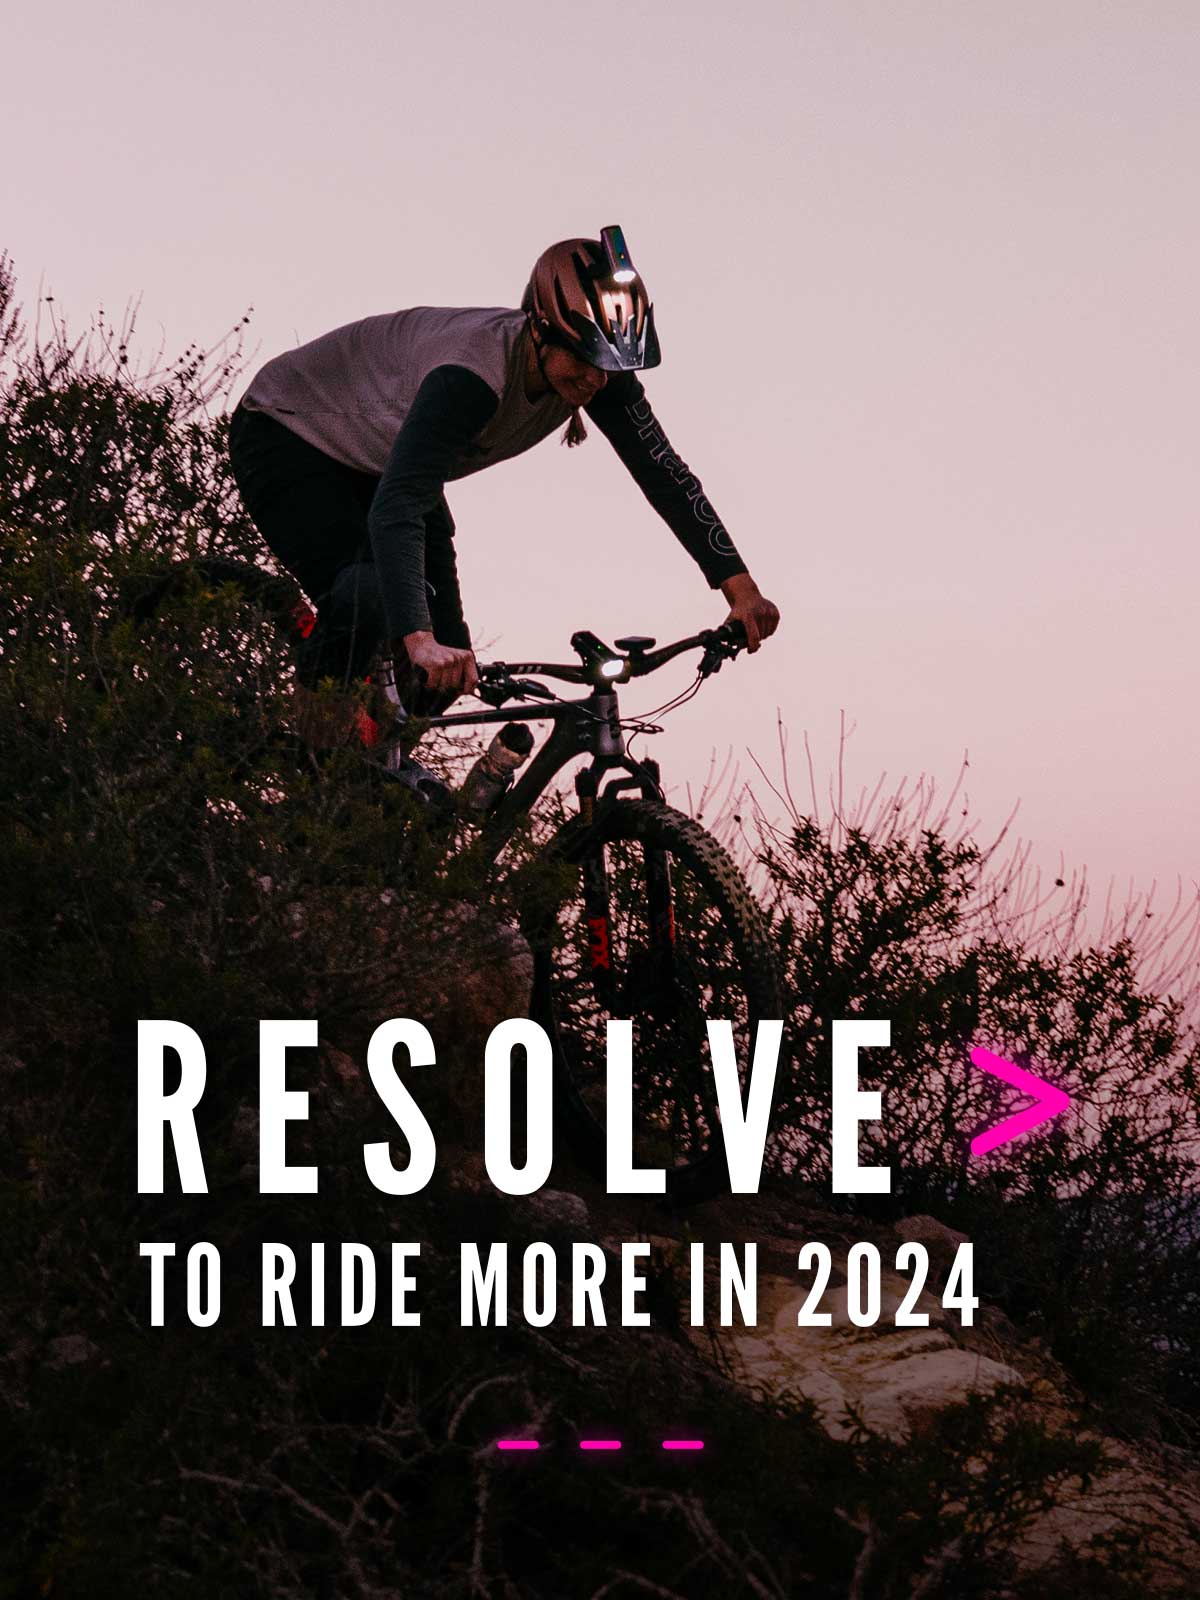 Bike rider descending down a mountain at dusk with lights with type that says 'Resolve to ride more in 2024'